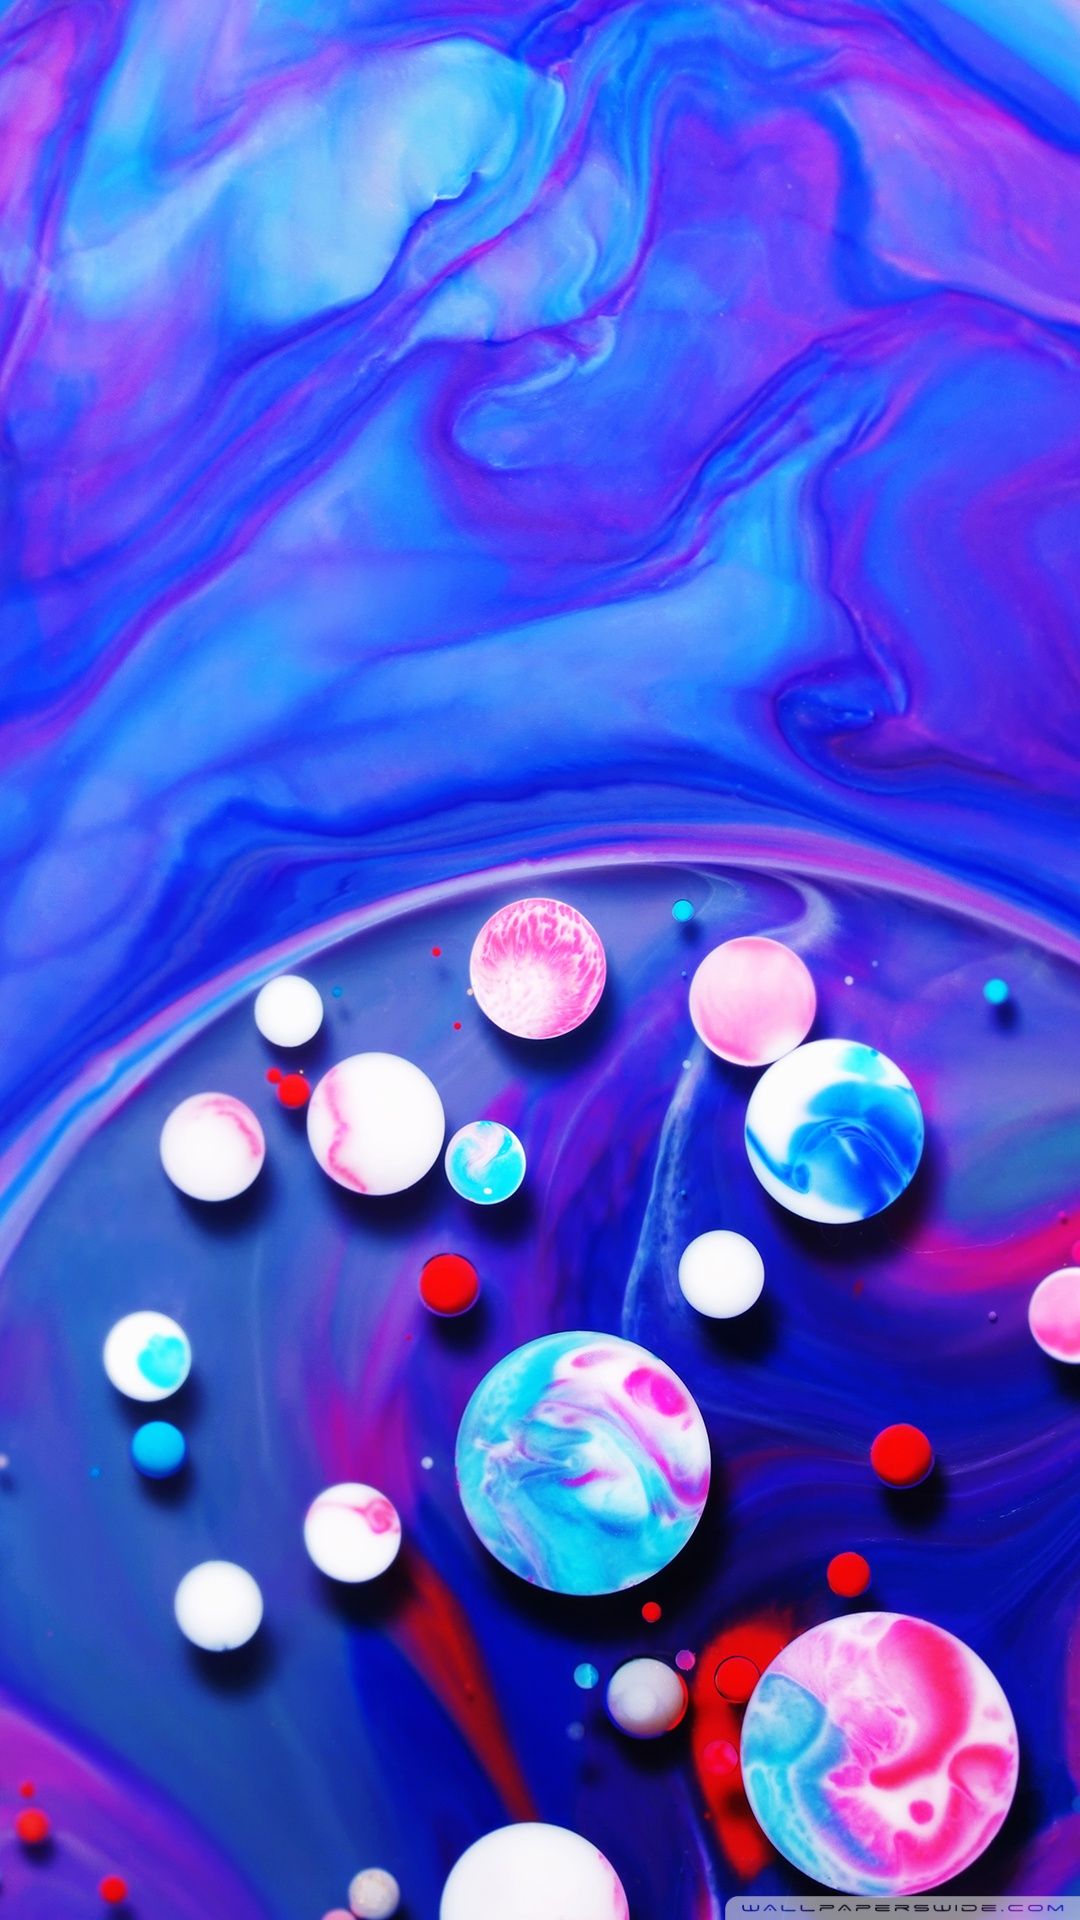 Paint Mix Bubbles Ultra HD Desktop Background Wallpaper for 4K UHD TV : Multi Display, Dual Monitor : Tablet